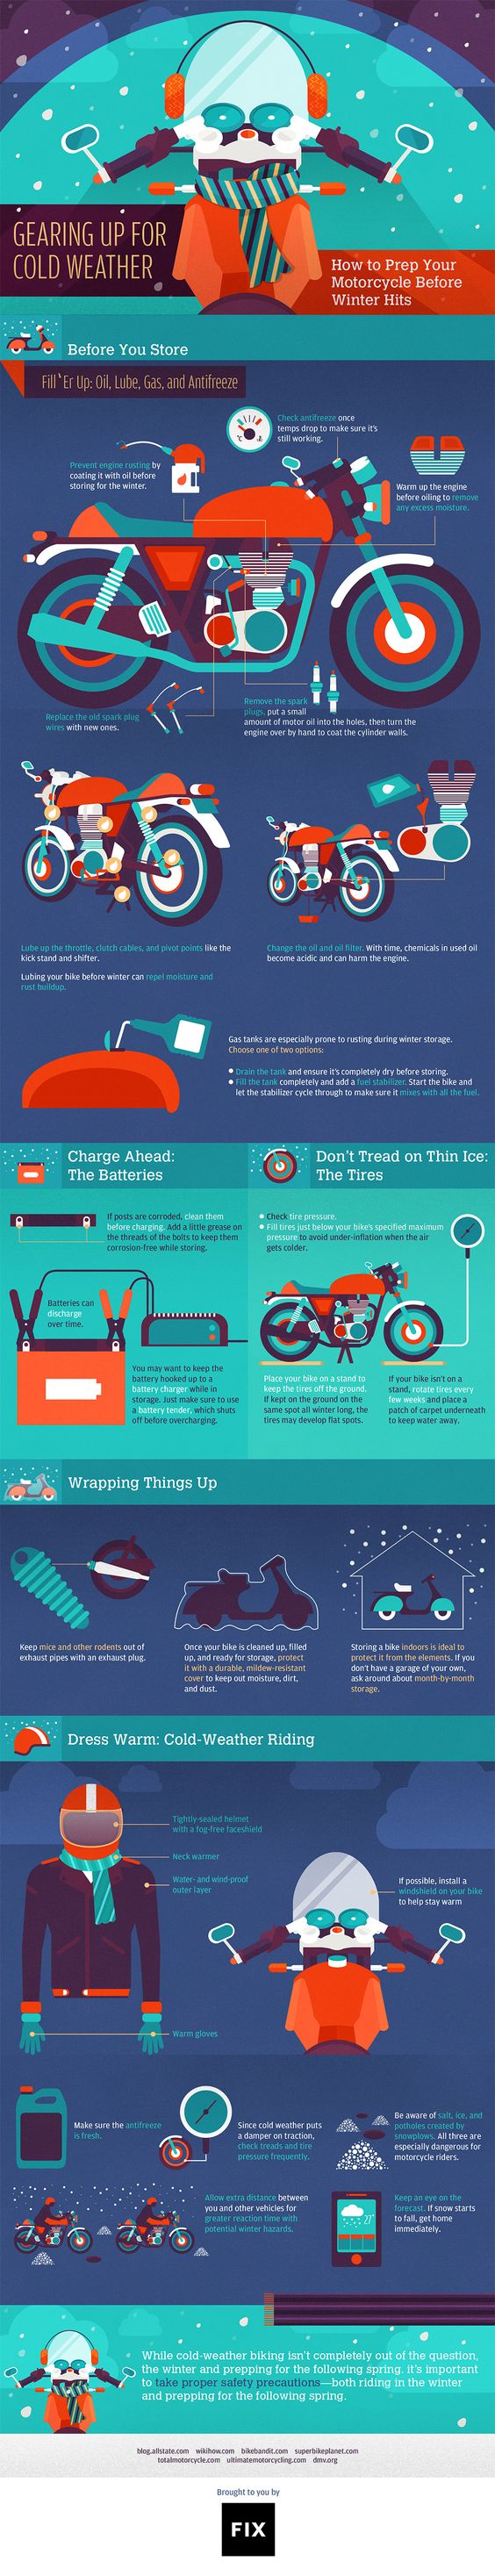 Gear up for the cold season with these tips for winterizing your motorcycle ahead of storage or winter riding. #motorcycle